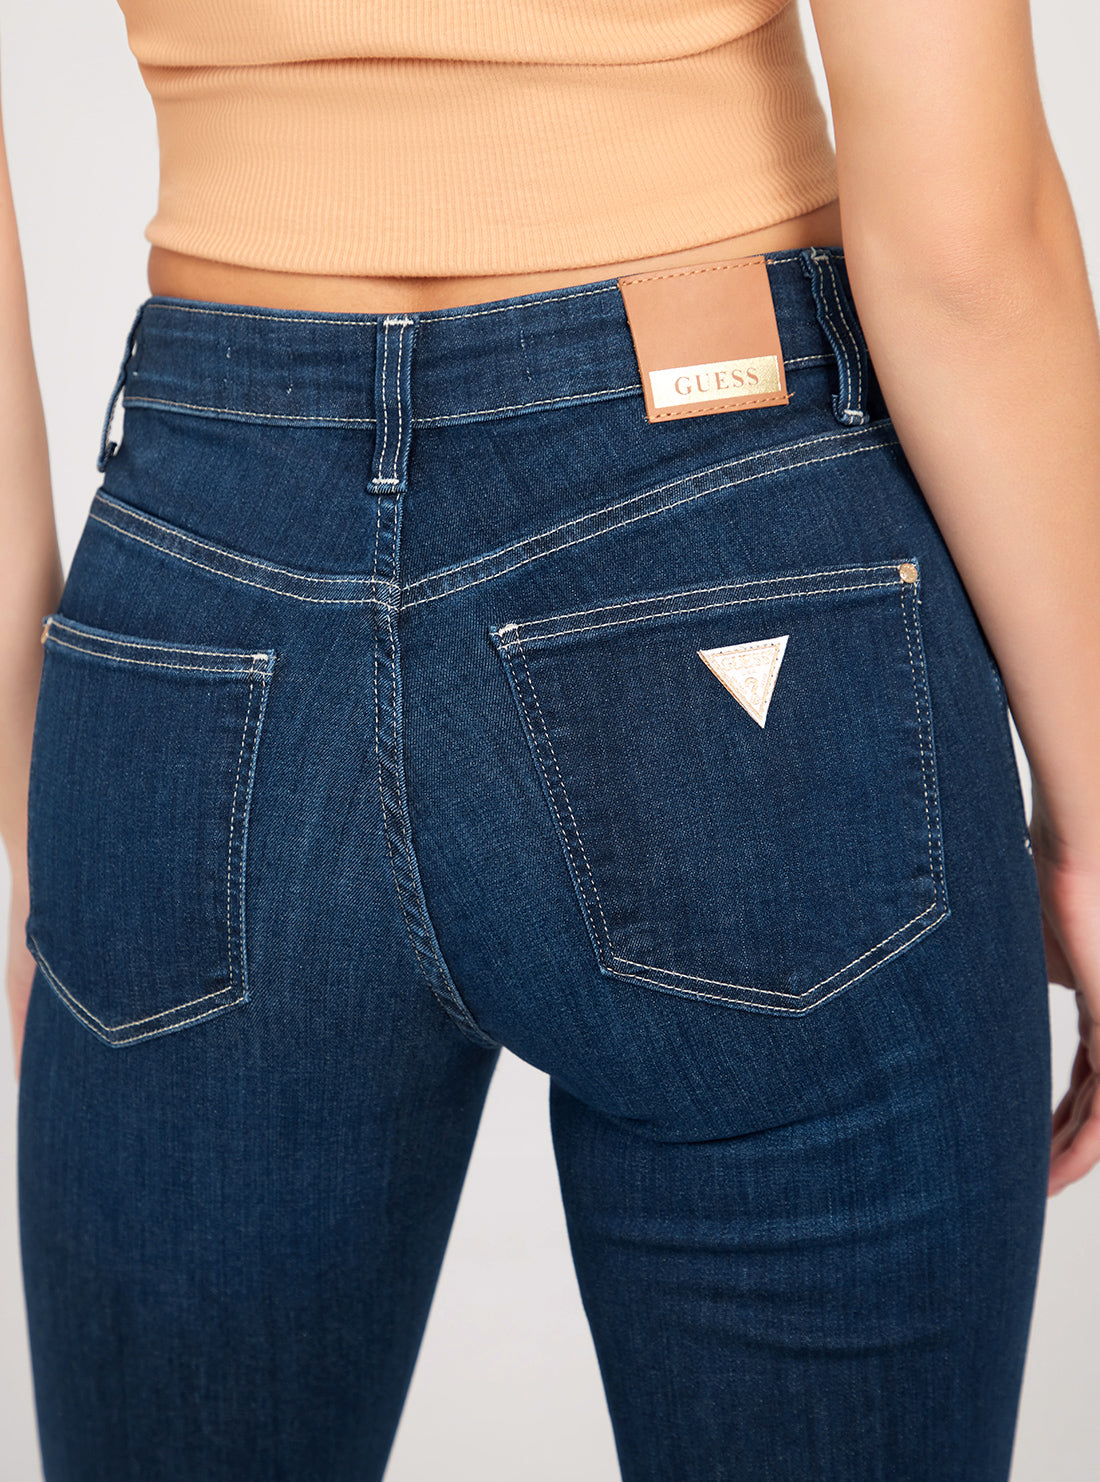 GUESS Mid-Rise Sexy Bootleg Cut Denim Jeans In Dark Wash detail view